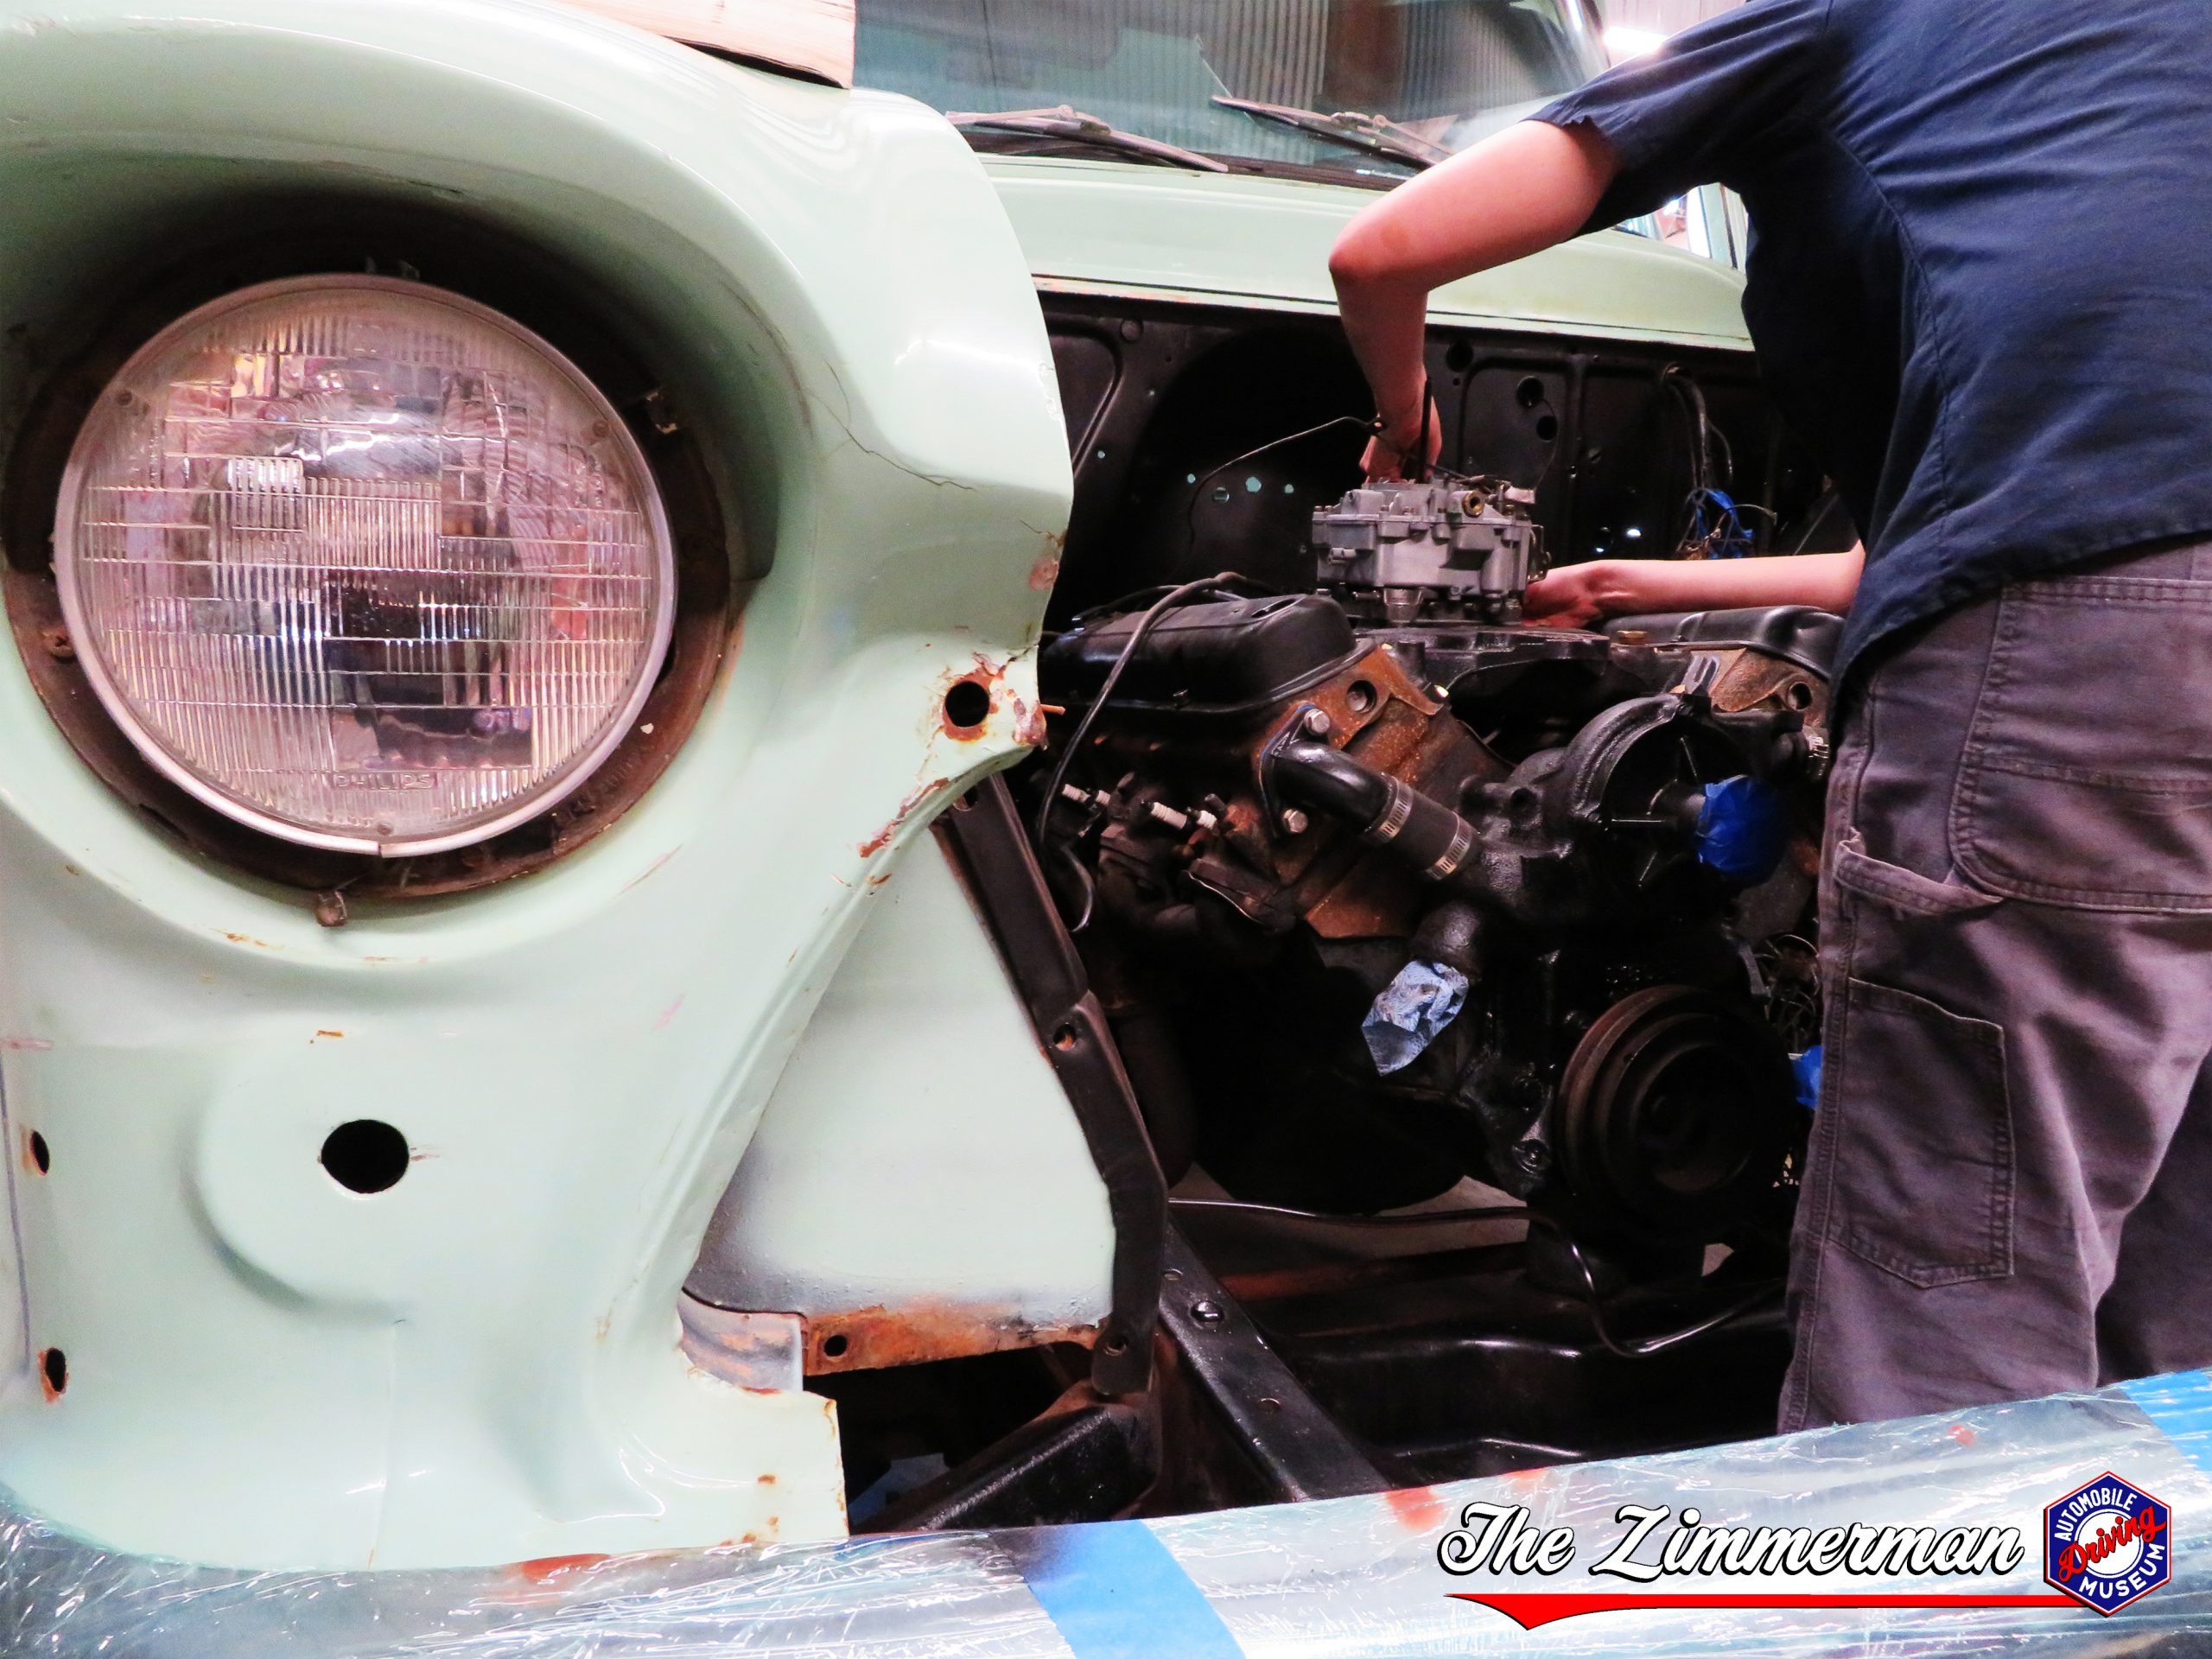 Restoring a classic car at the Automobile Driving Museum